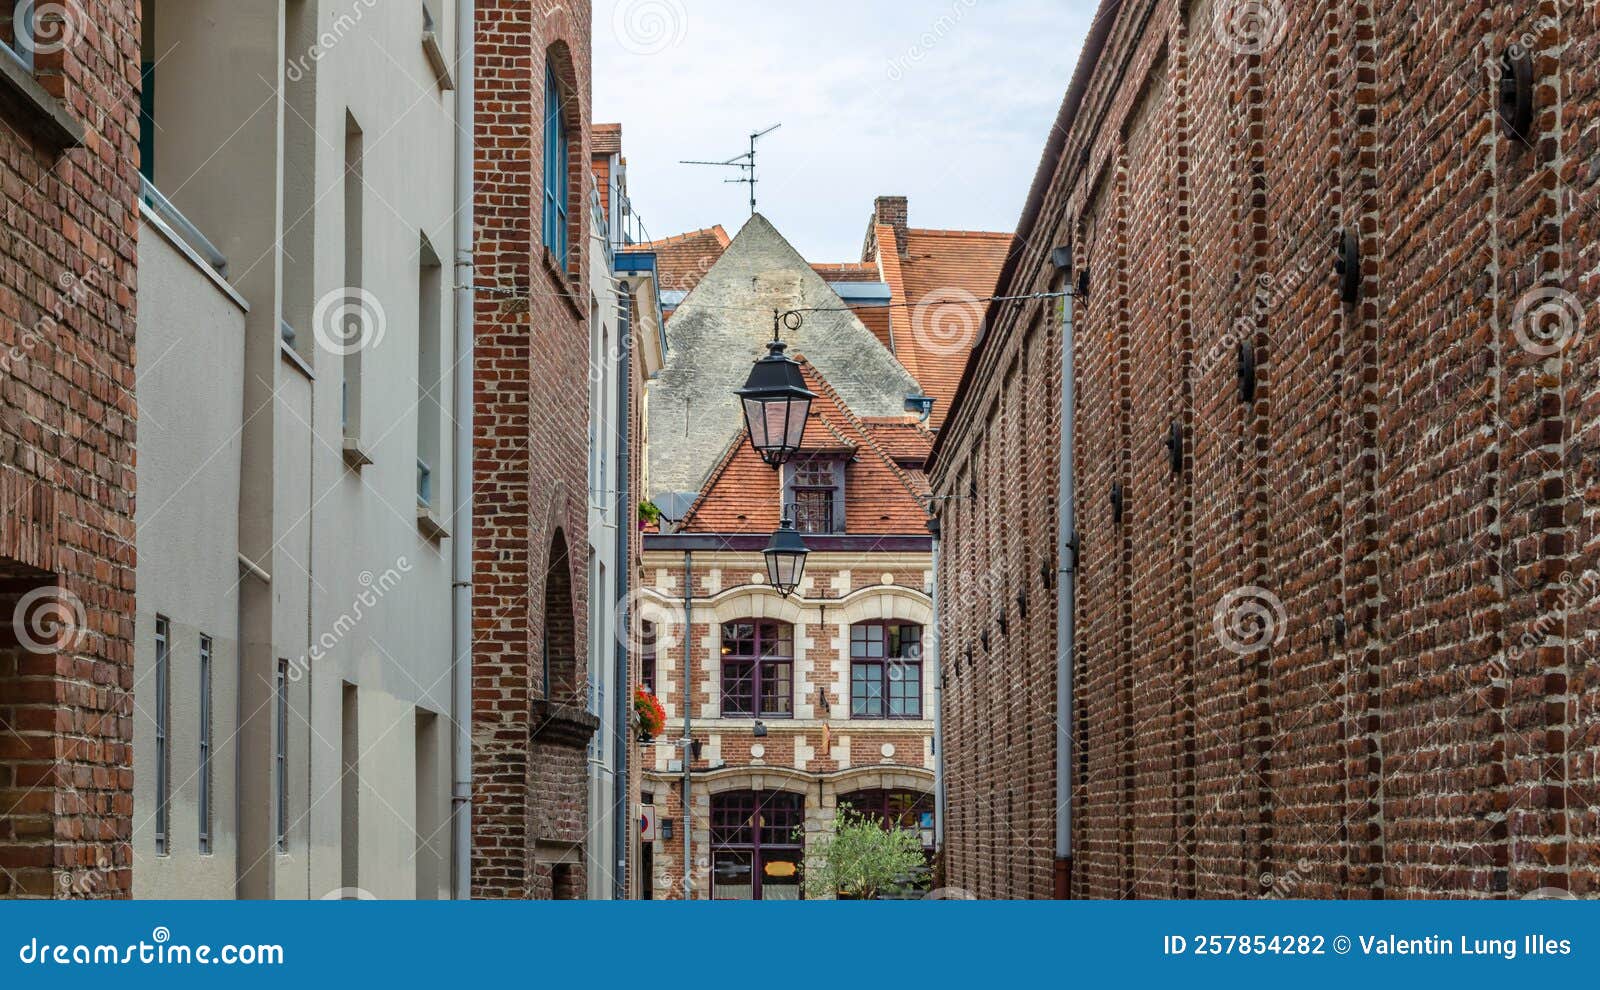 Architecture in Lille, France Stock Photo - Image of city, lille: 257854282